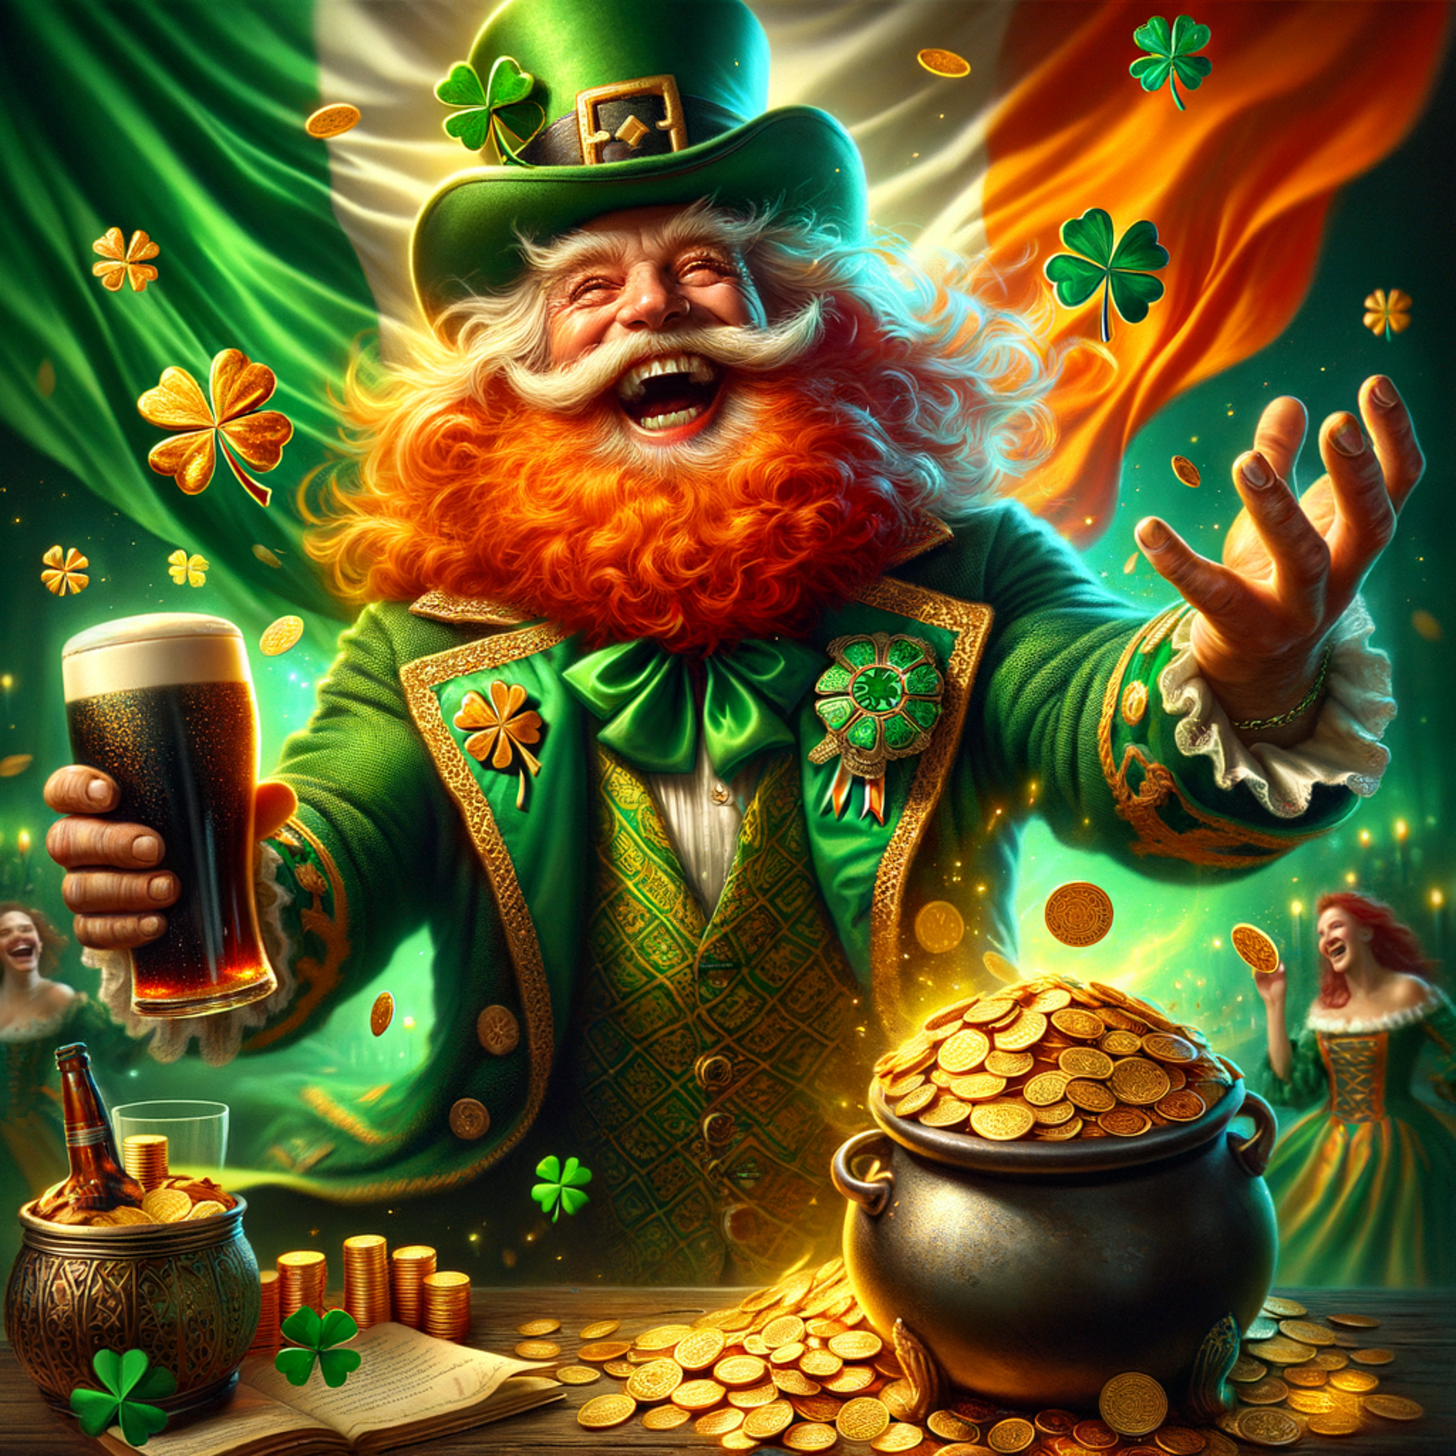 This image is vibrant and full of joy, capturing the essence of Irish folklore. Centered in the image is a jubilant leprechaun, the archetypal Irish fairy. He is depicted as an elderly man with a bushy, bright orange beard, laughing heartily with his mouth open wide, revealing his teeth. He's adorned in a traditional green suit richly decorated with golden clover and Celtic knot motifs, which symbolize luck and the eternal cycle. On his head sits a green top hat, accented with a golden buckle. In his right hand, he holds a pint of dark stout beer that seems to froth over the edge of the glass.  The leprechaun is extending his left hand towards the viewer, as if inviting them into the celebration. Behind him, a background of green drapery and a swirling golden light gives a magical, almost ethereal glow to the scene, enhancing the festive atmosphere. The air is filled with floating golden coins and four-leaf clovers, symbols of fortune and good luck.  In the foreground, to the leprechaun's right, there's a pot overflowing with gold coins, suggesting the fabled pot of gold at the end of the rainbow in Irish mythology. Adjacent to the pot is an open book with a quill, perhaps implying the rich storytelling culture of Ireland. There's also a small bottle with a label and a shot glass, indicating more merriment to come. On the far right, slightly blurred, is a woman who appears to be dancing joyfully, her red hair flowing and her green dress a blur of movement.  The entire scene is crafted to evoke the lively spirit of St. Patrick's Day celebrations, where myth and merriment meet.